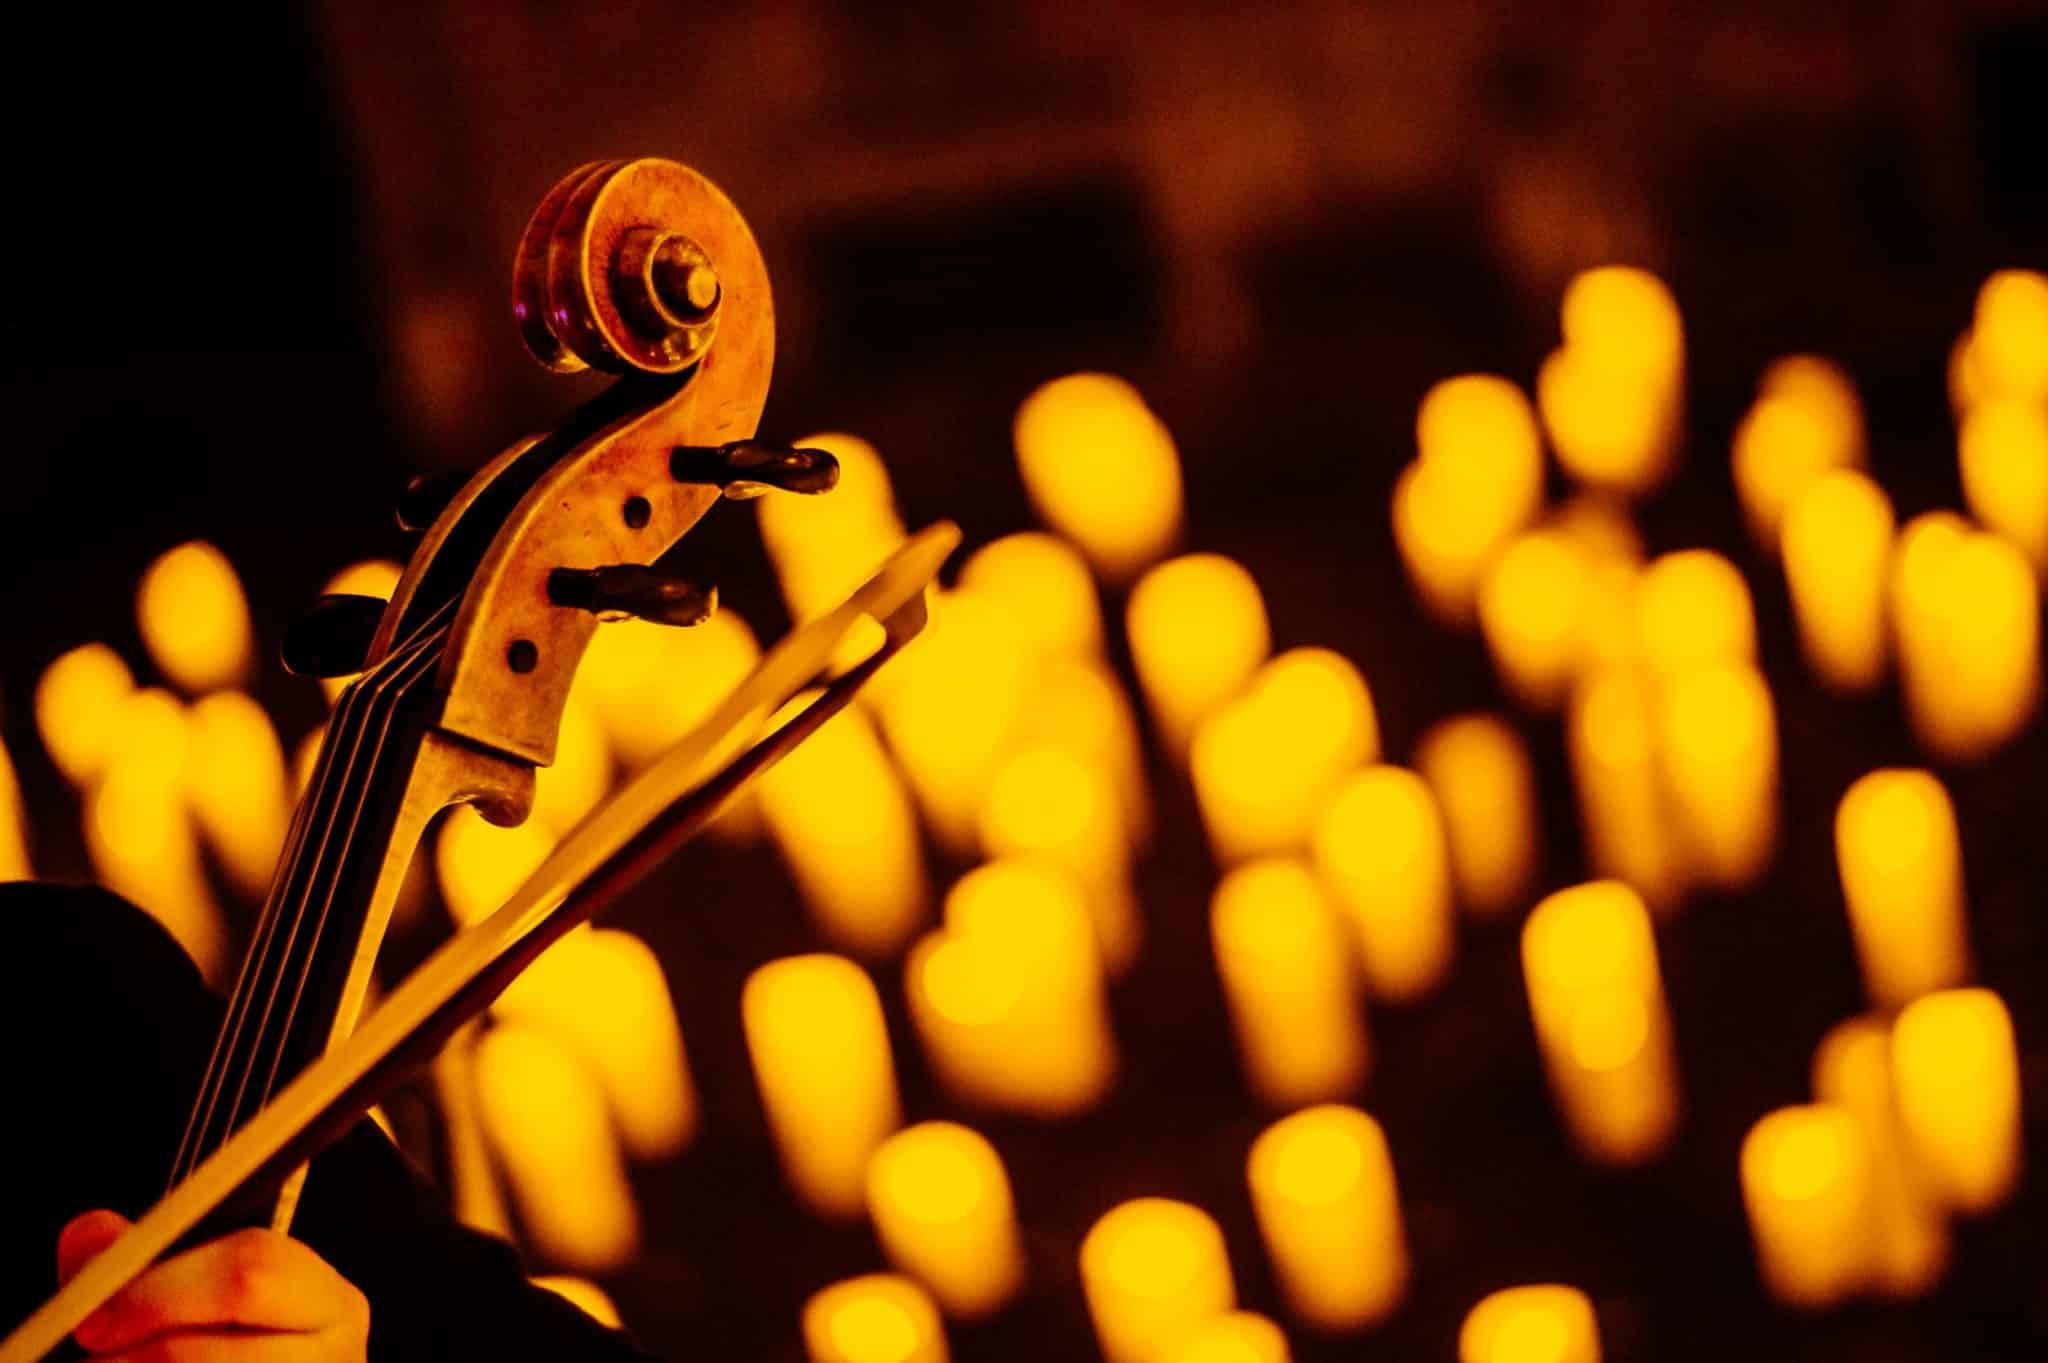 The top of a violin and a bow with the blurry image of candles in the background.